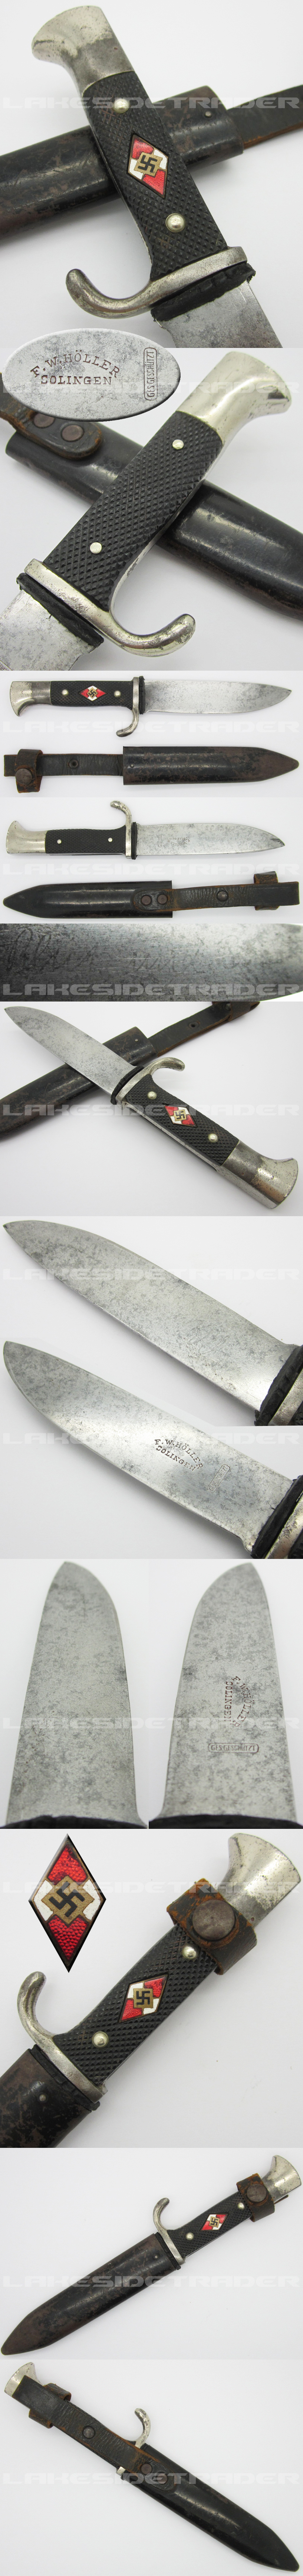 Early Hitler Youth Knife by H?ller